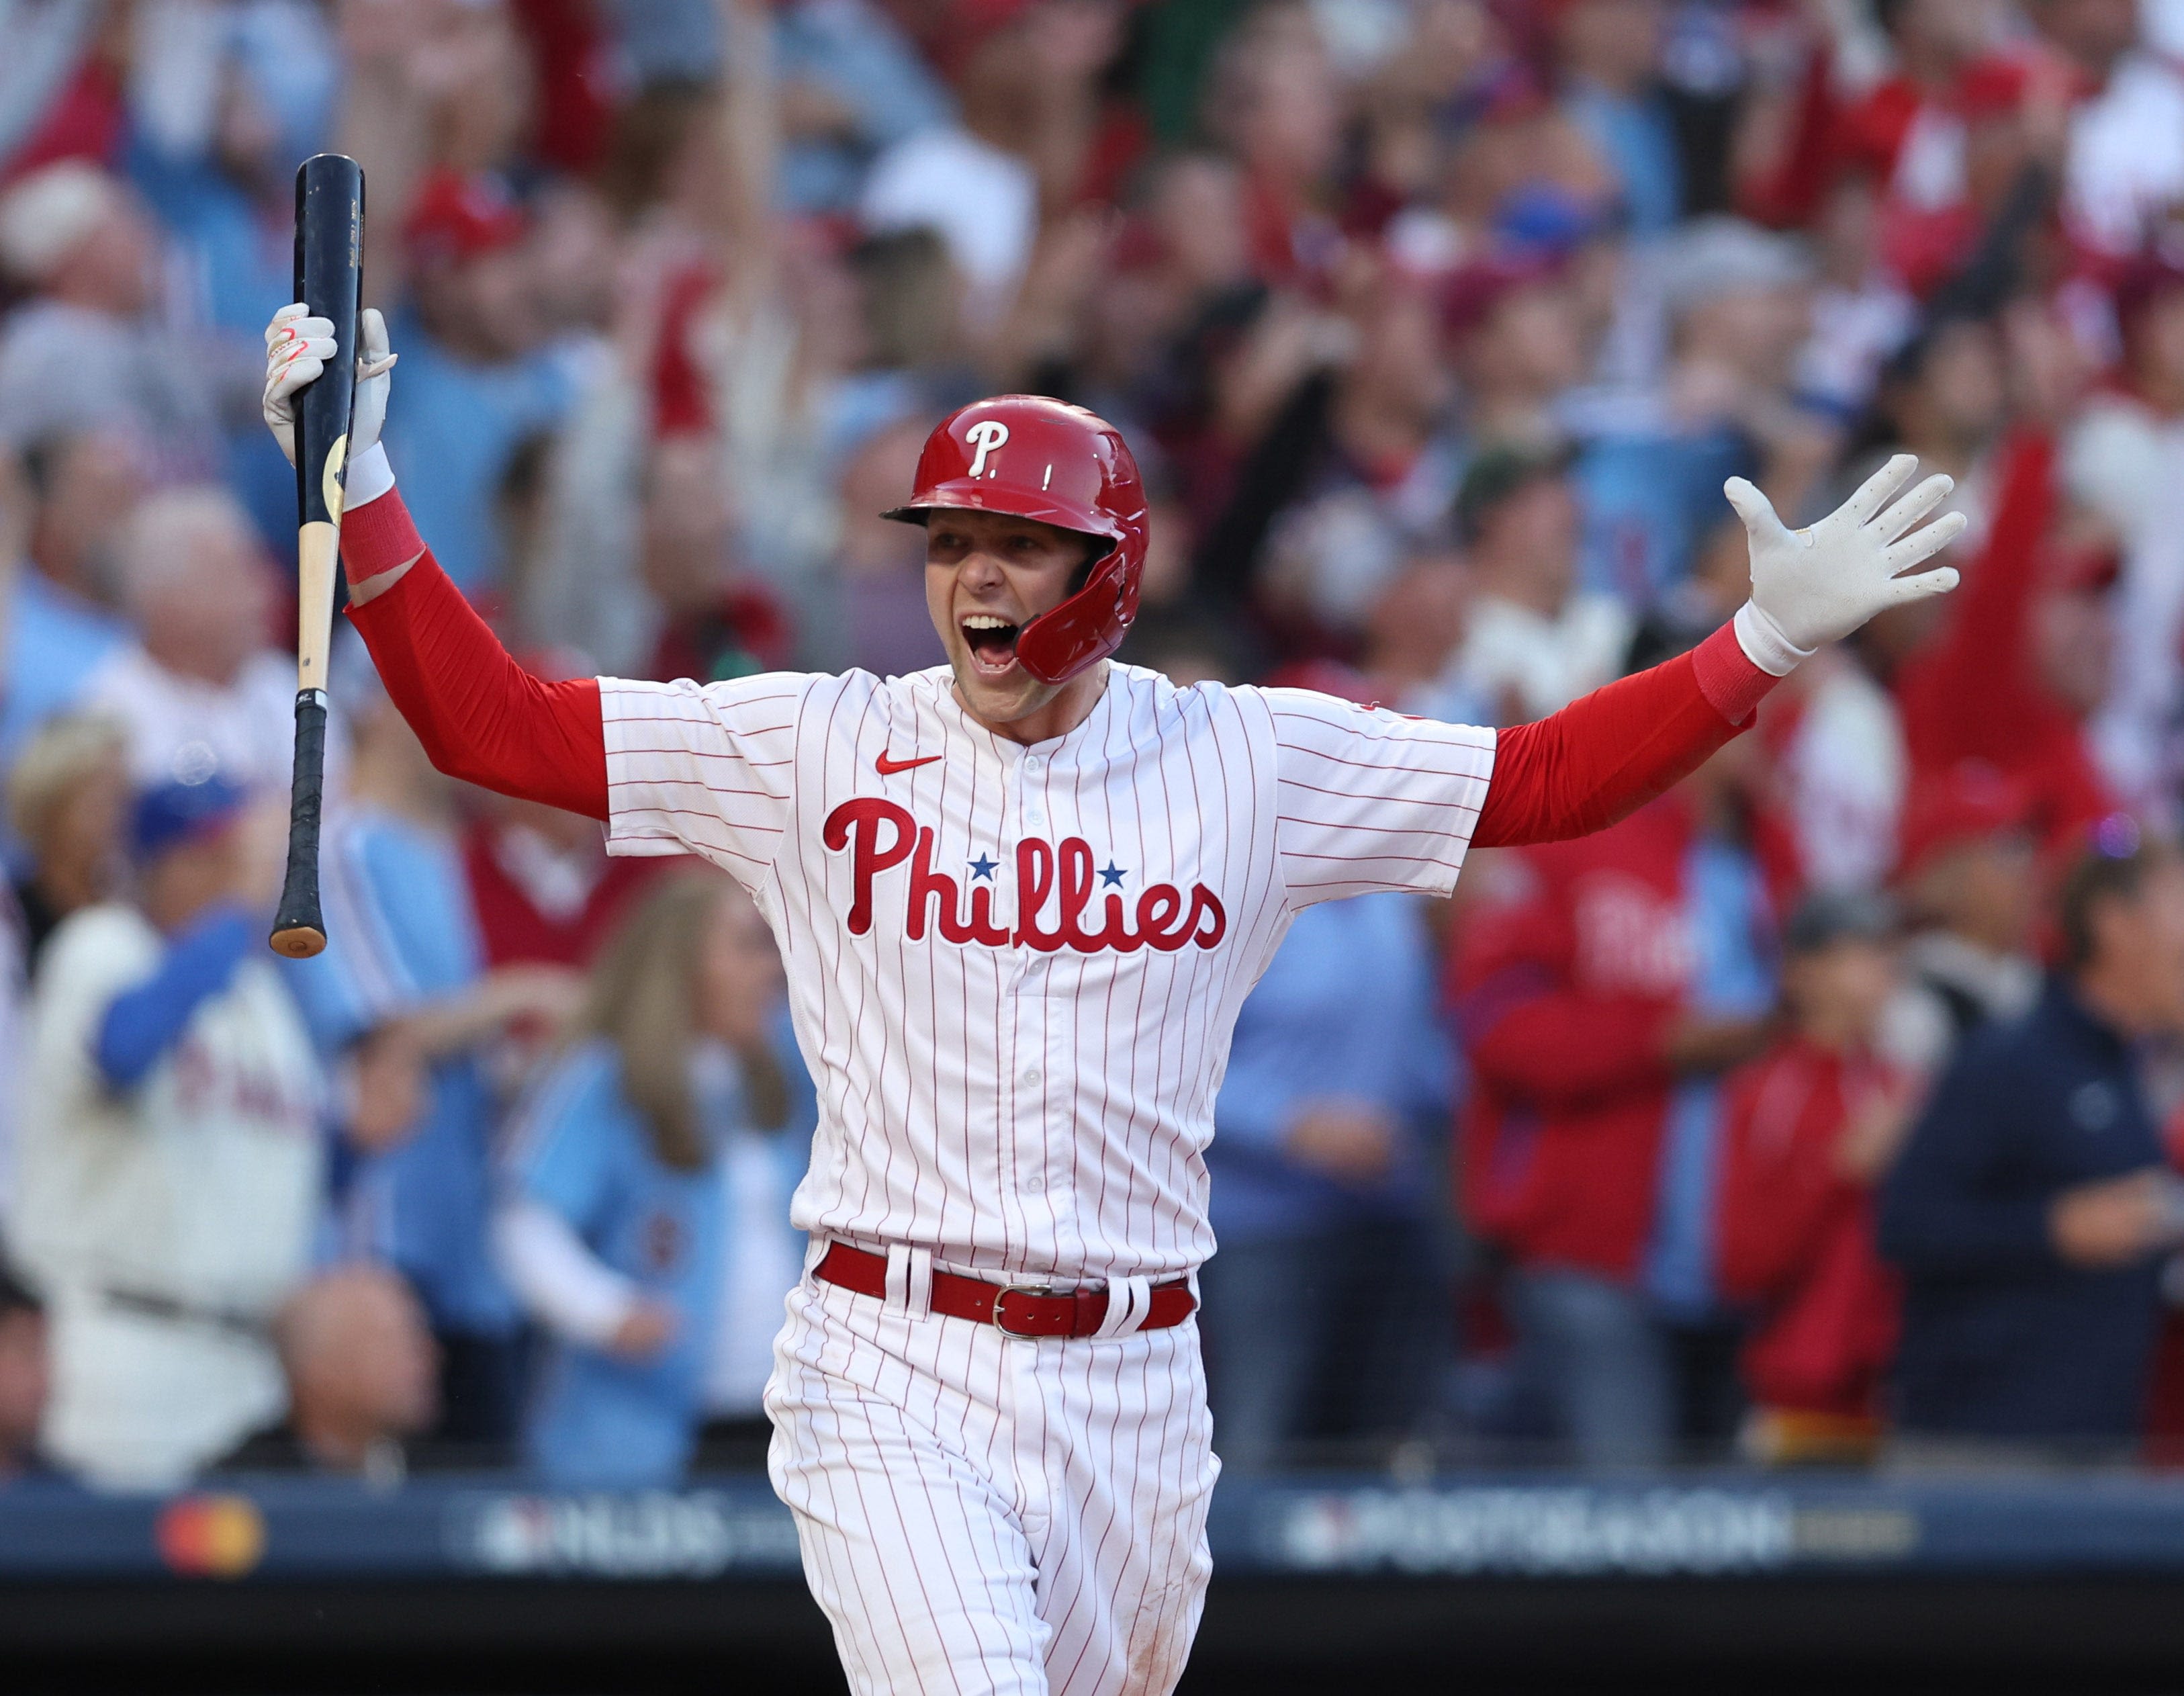 As Rhys Hoskins returns to Philly as a Brewer, here are his top moments with the Phillies